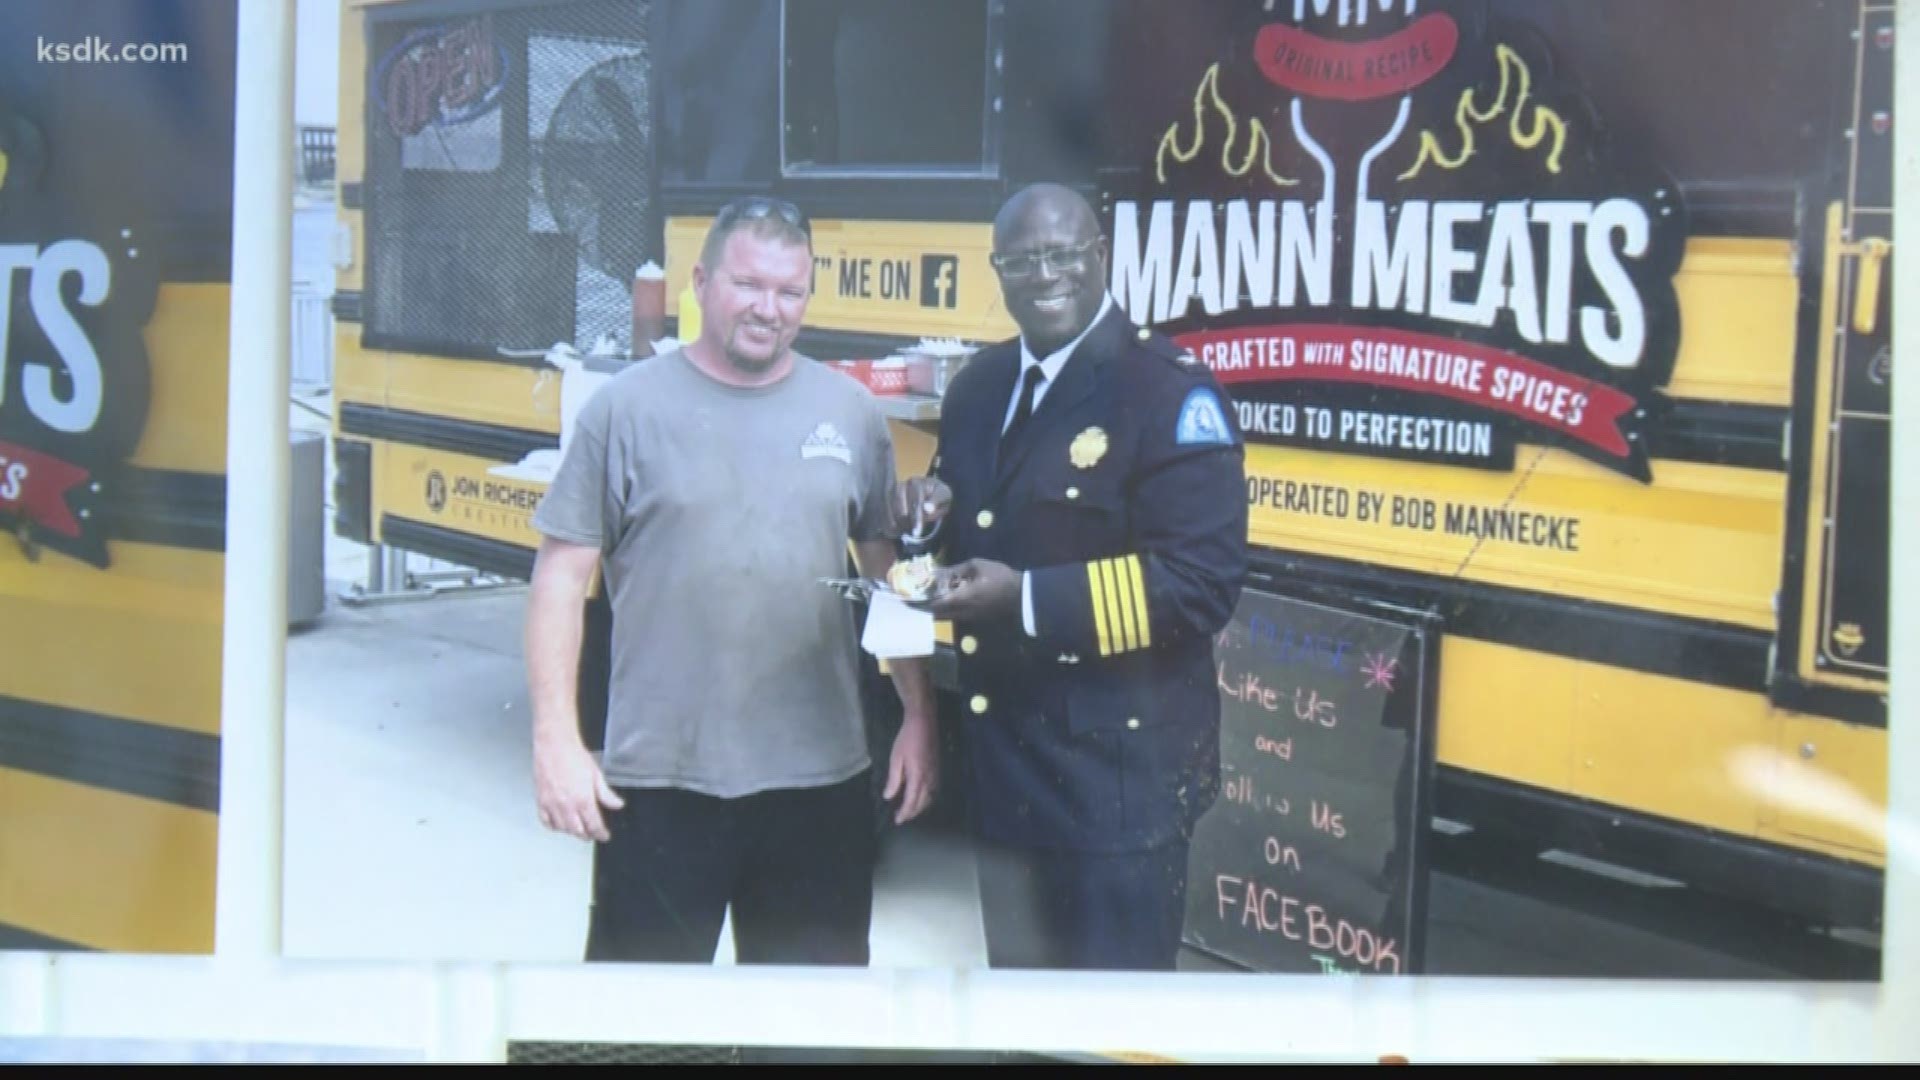 Mann Meats operates a food truck, gives back to the community, and now has a carry out restaurant.